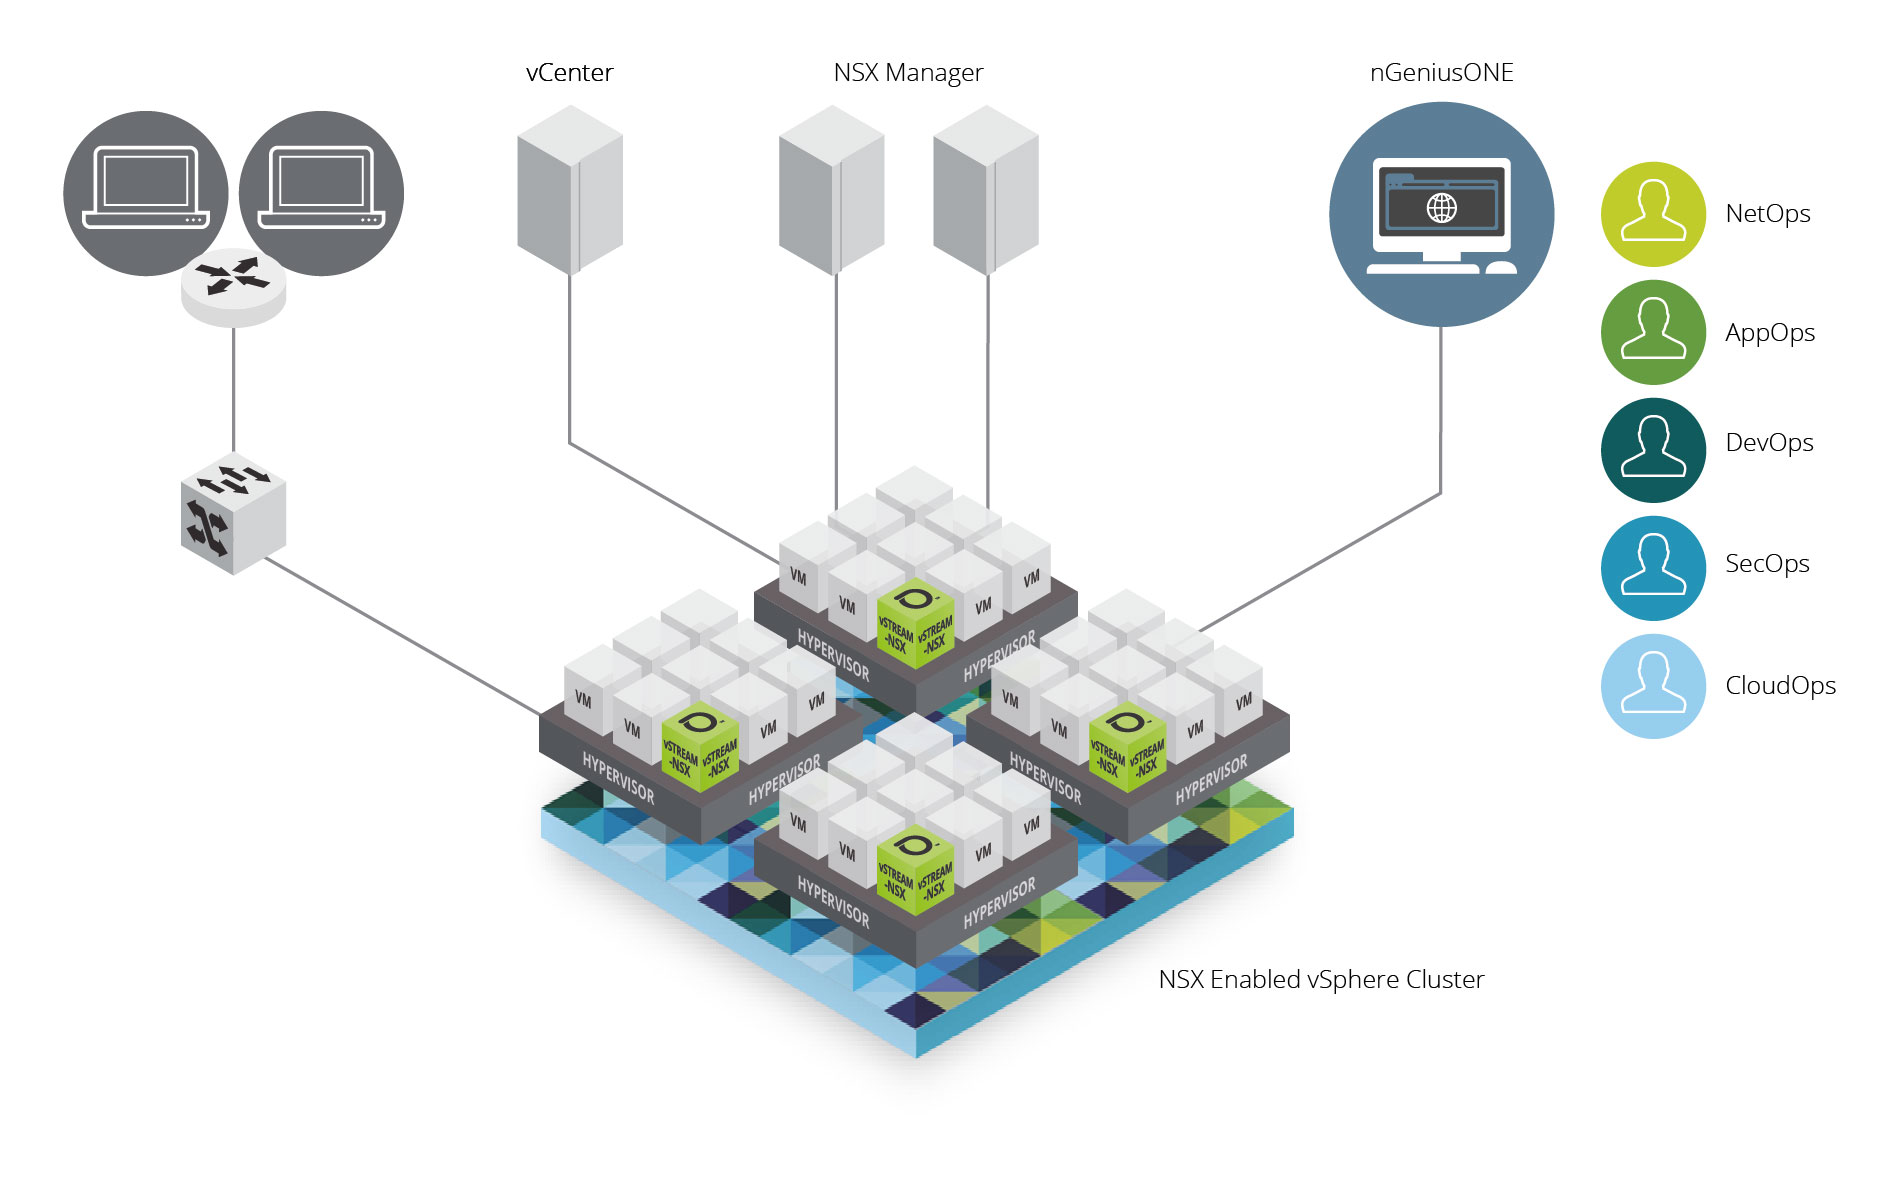  Innovative Visibility and Control in VMware Environments